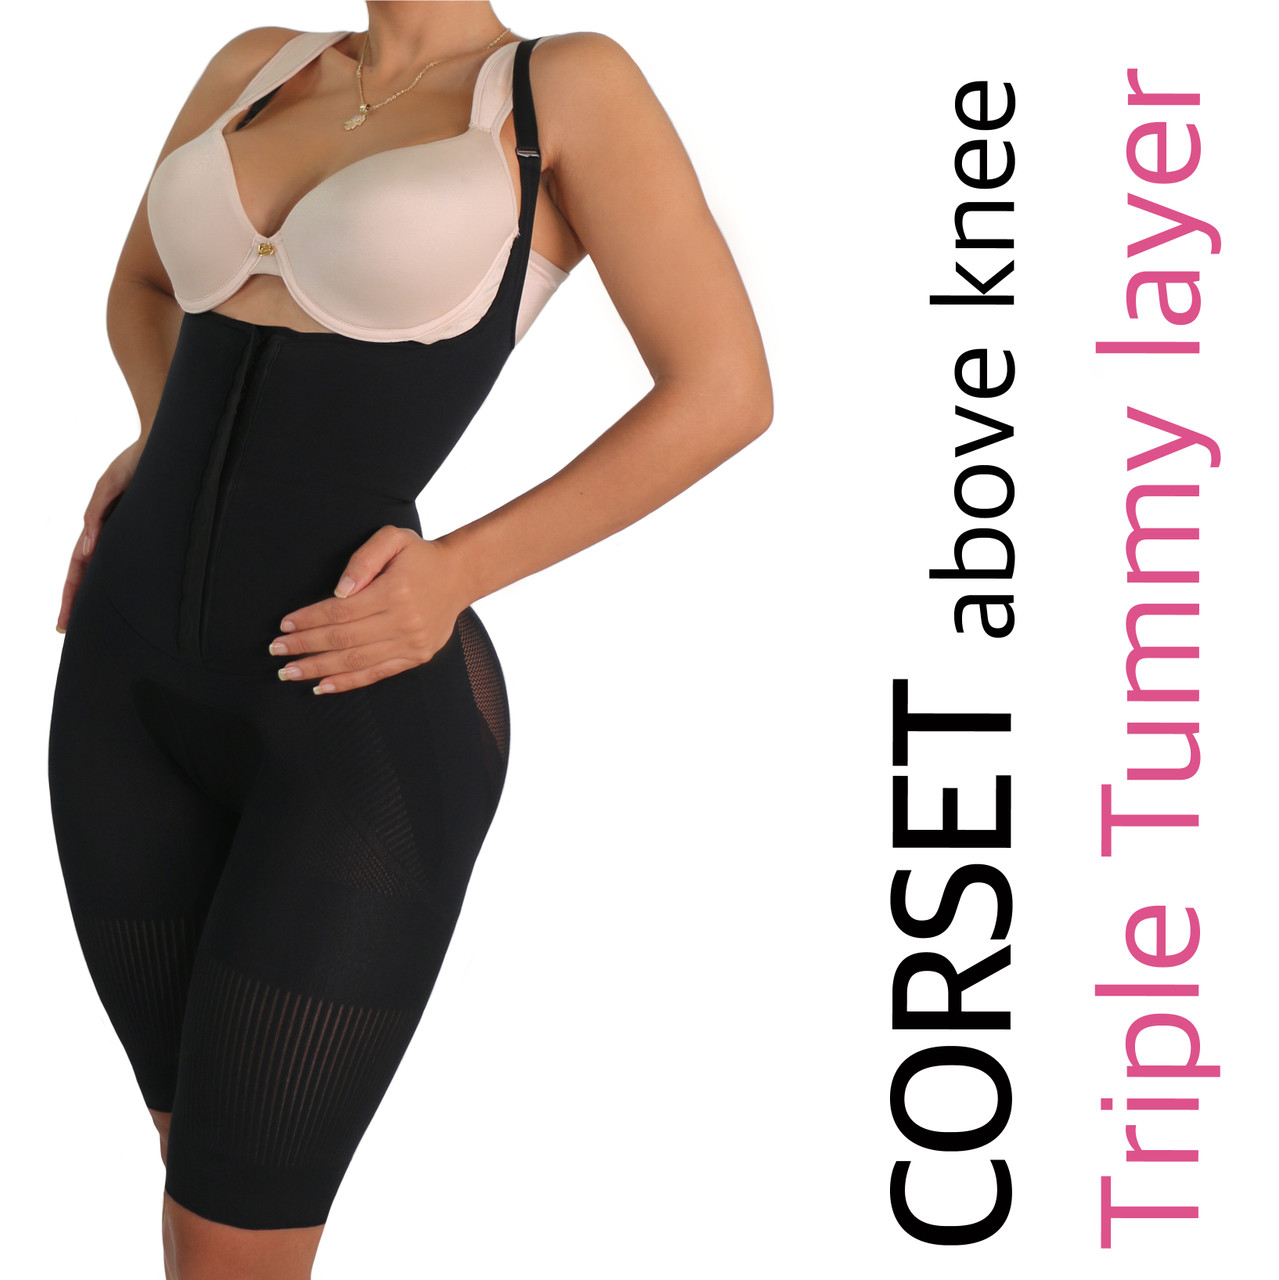 Thin strap Girdle with Lycra Buttock Covers - 1648